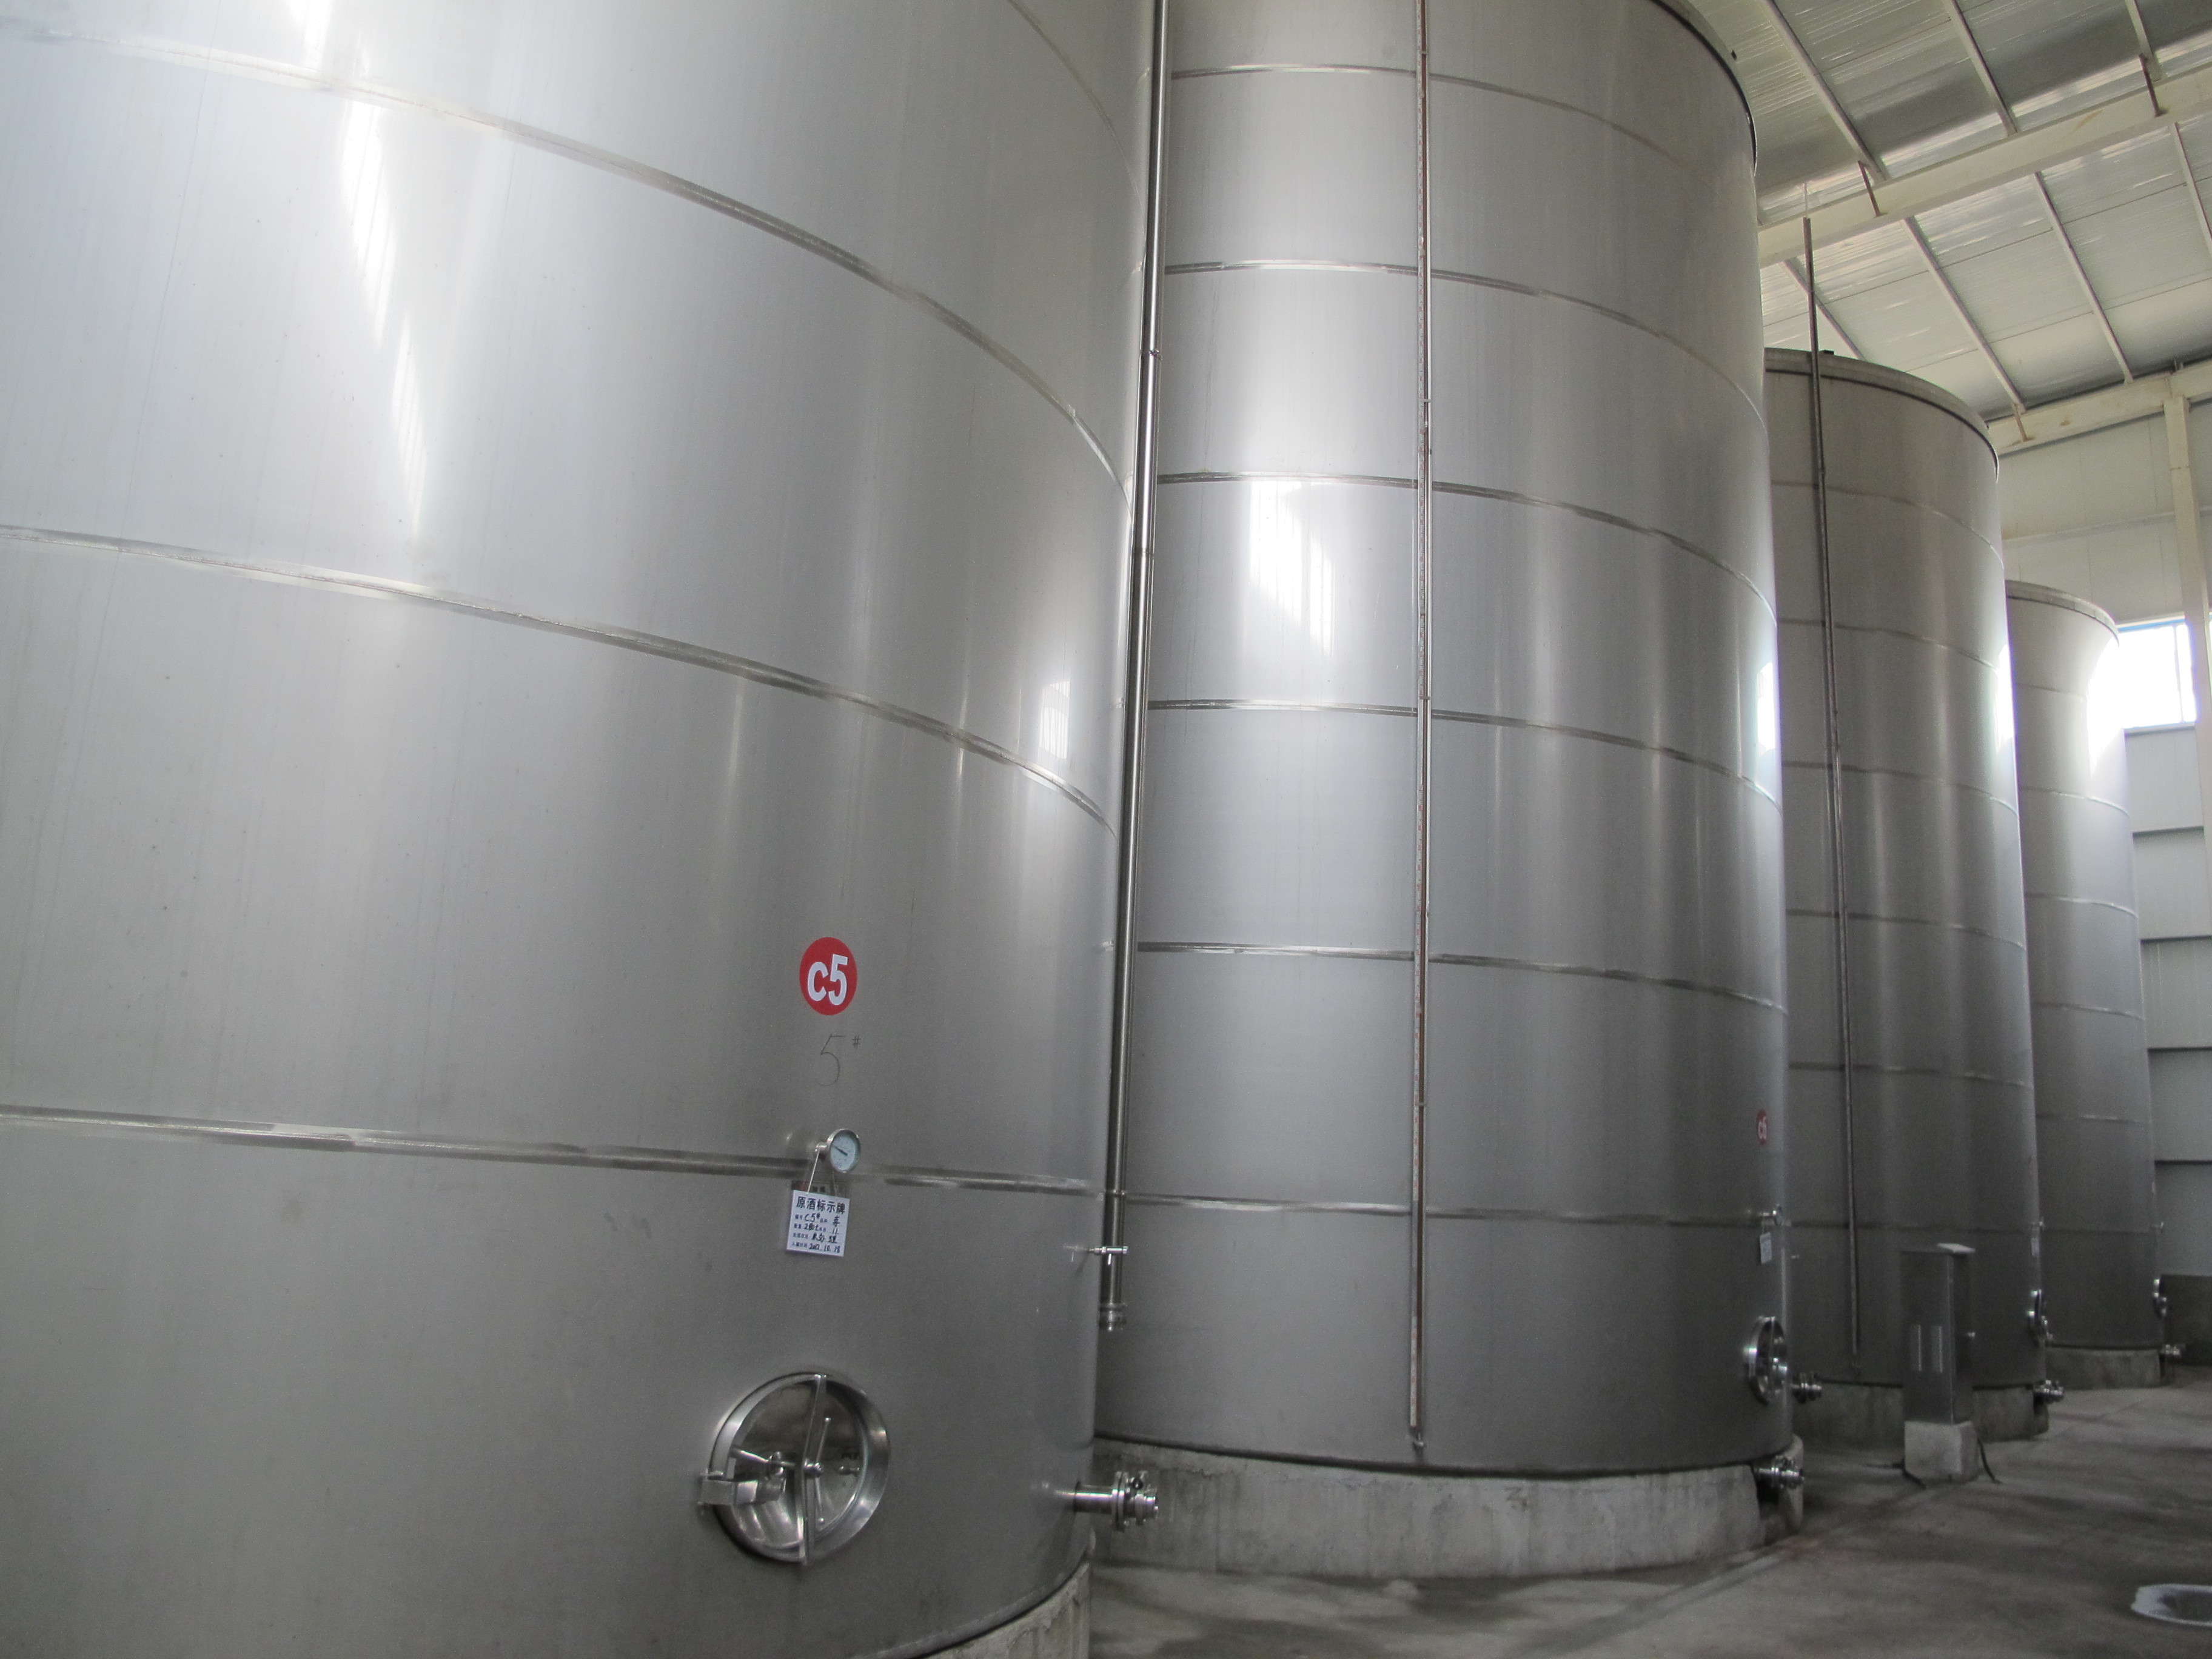  Stainless Steel Ethanol Storage Tank for Pharmaceutical, Chemical, etc Manufactures